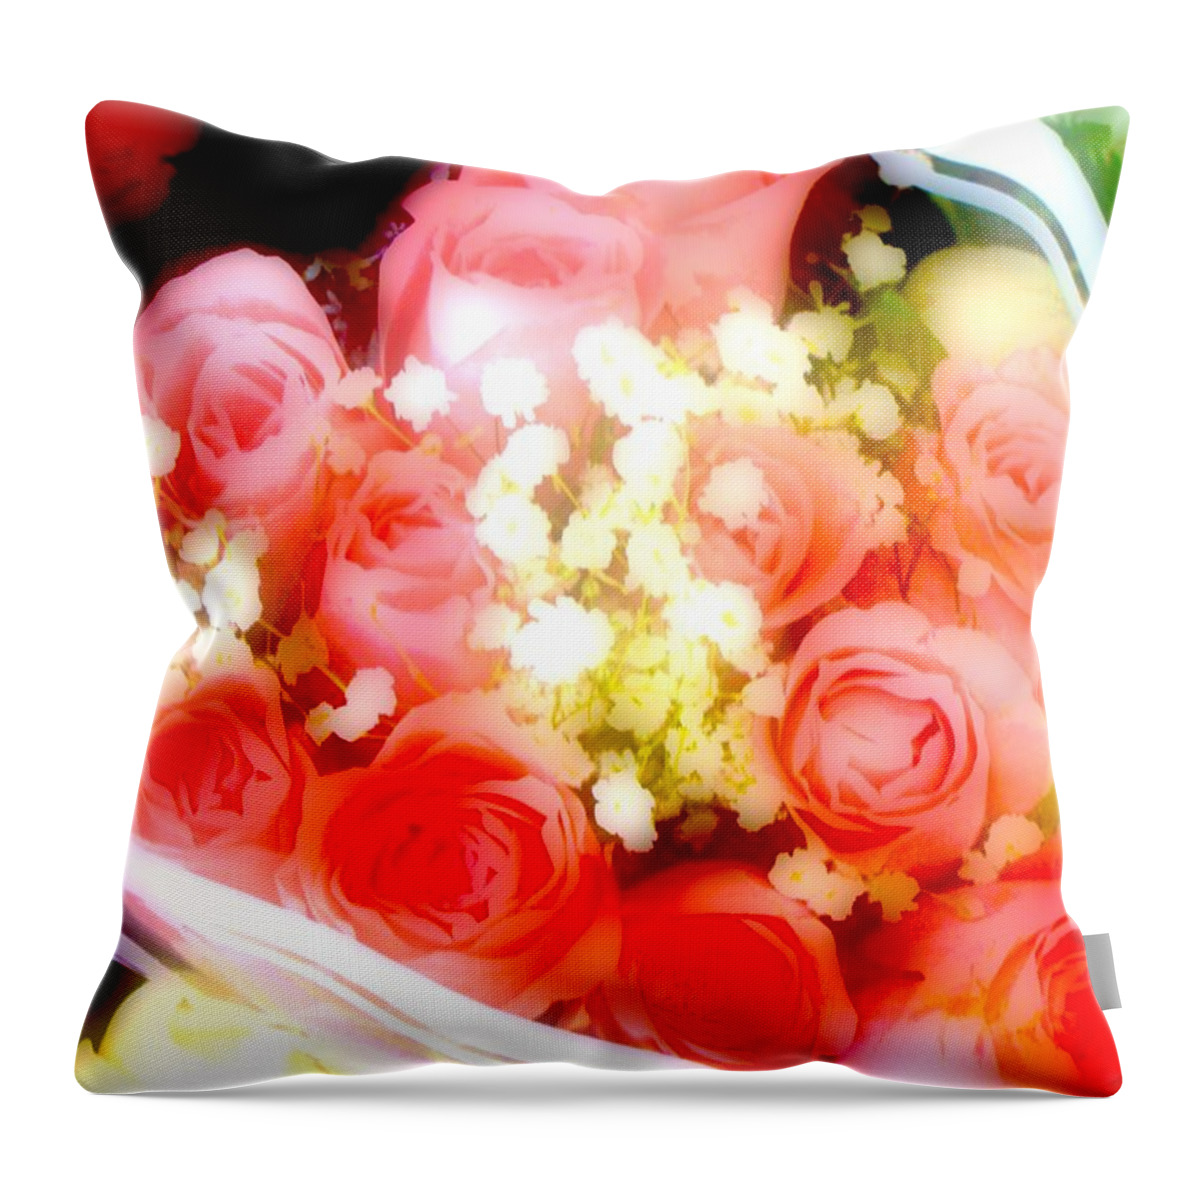 Roses Throw Pillow featuring the photograph Roses Are Red by Ira Shander